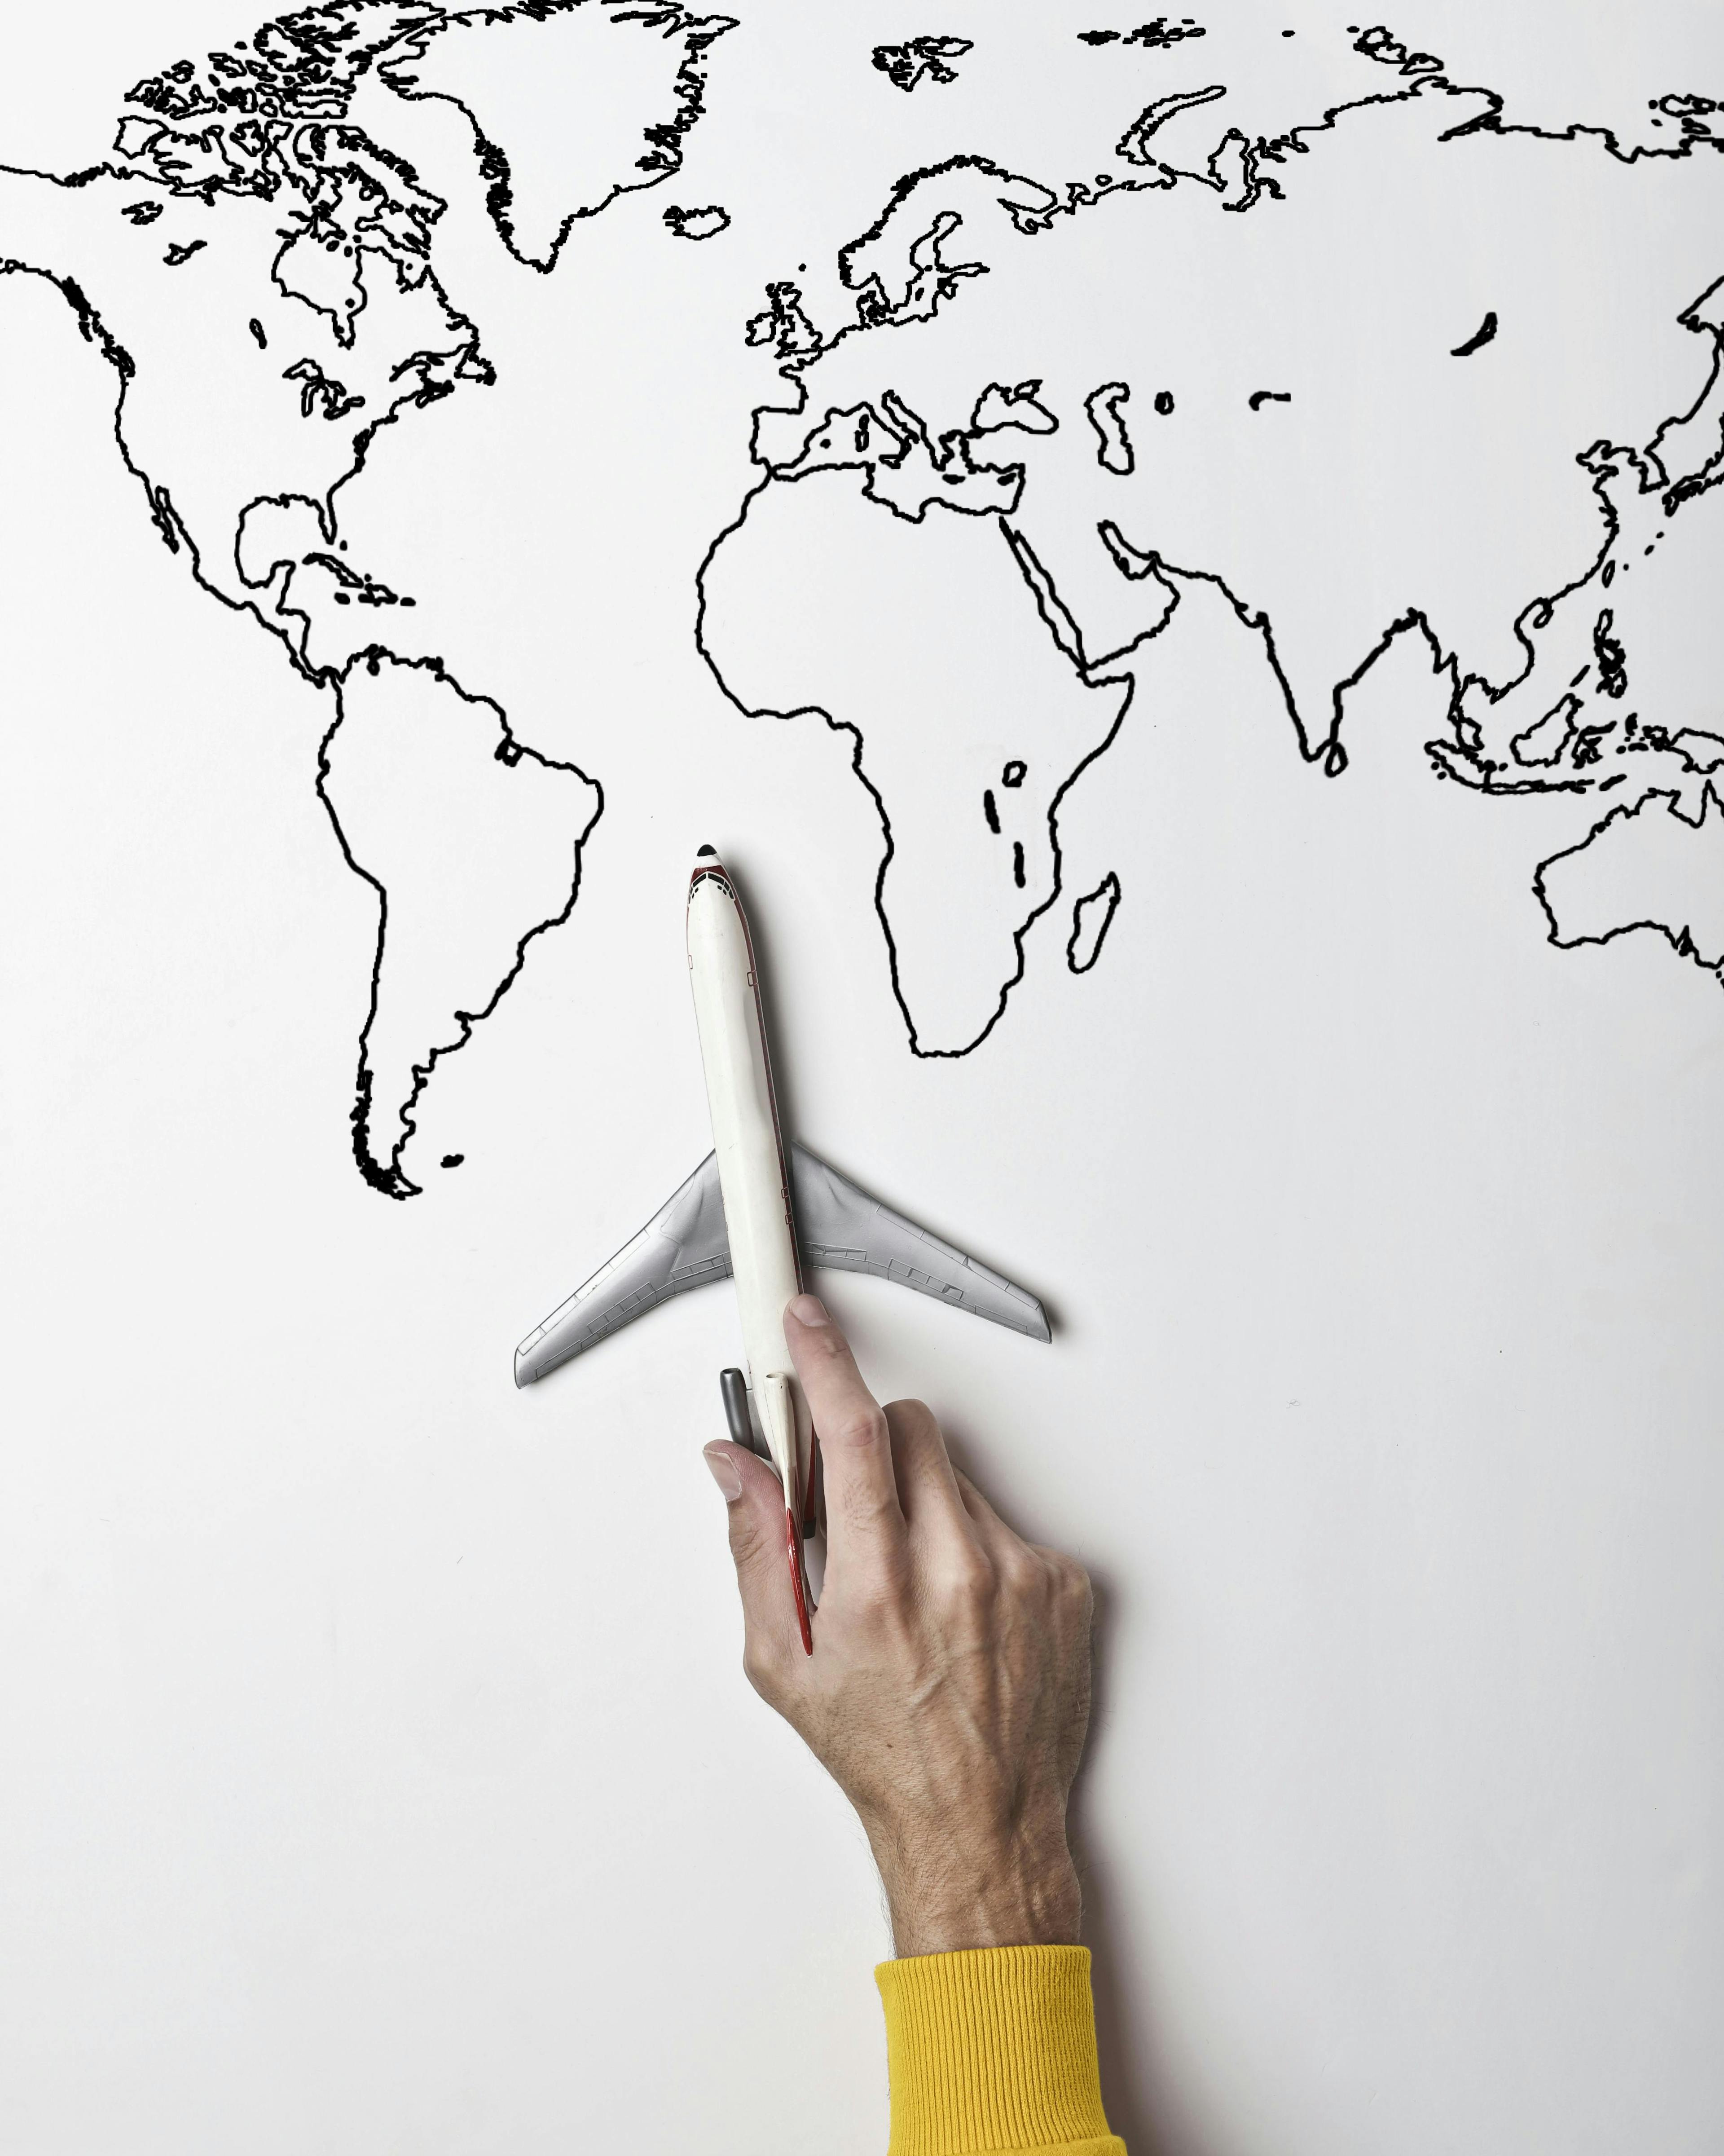 Person holding small toy airplane against black and white map